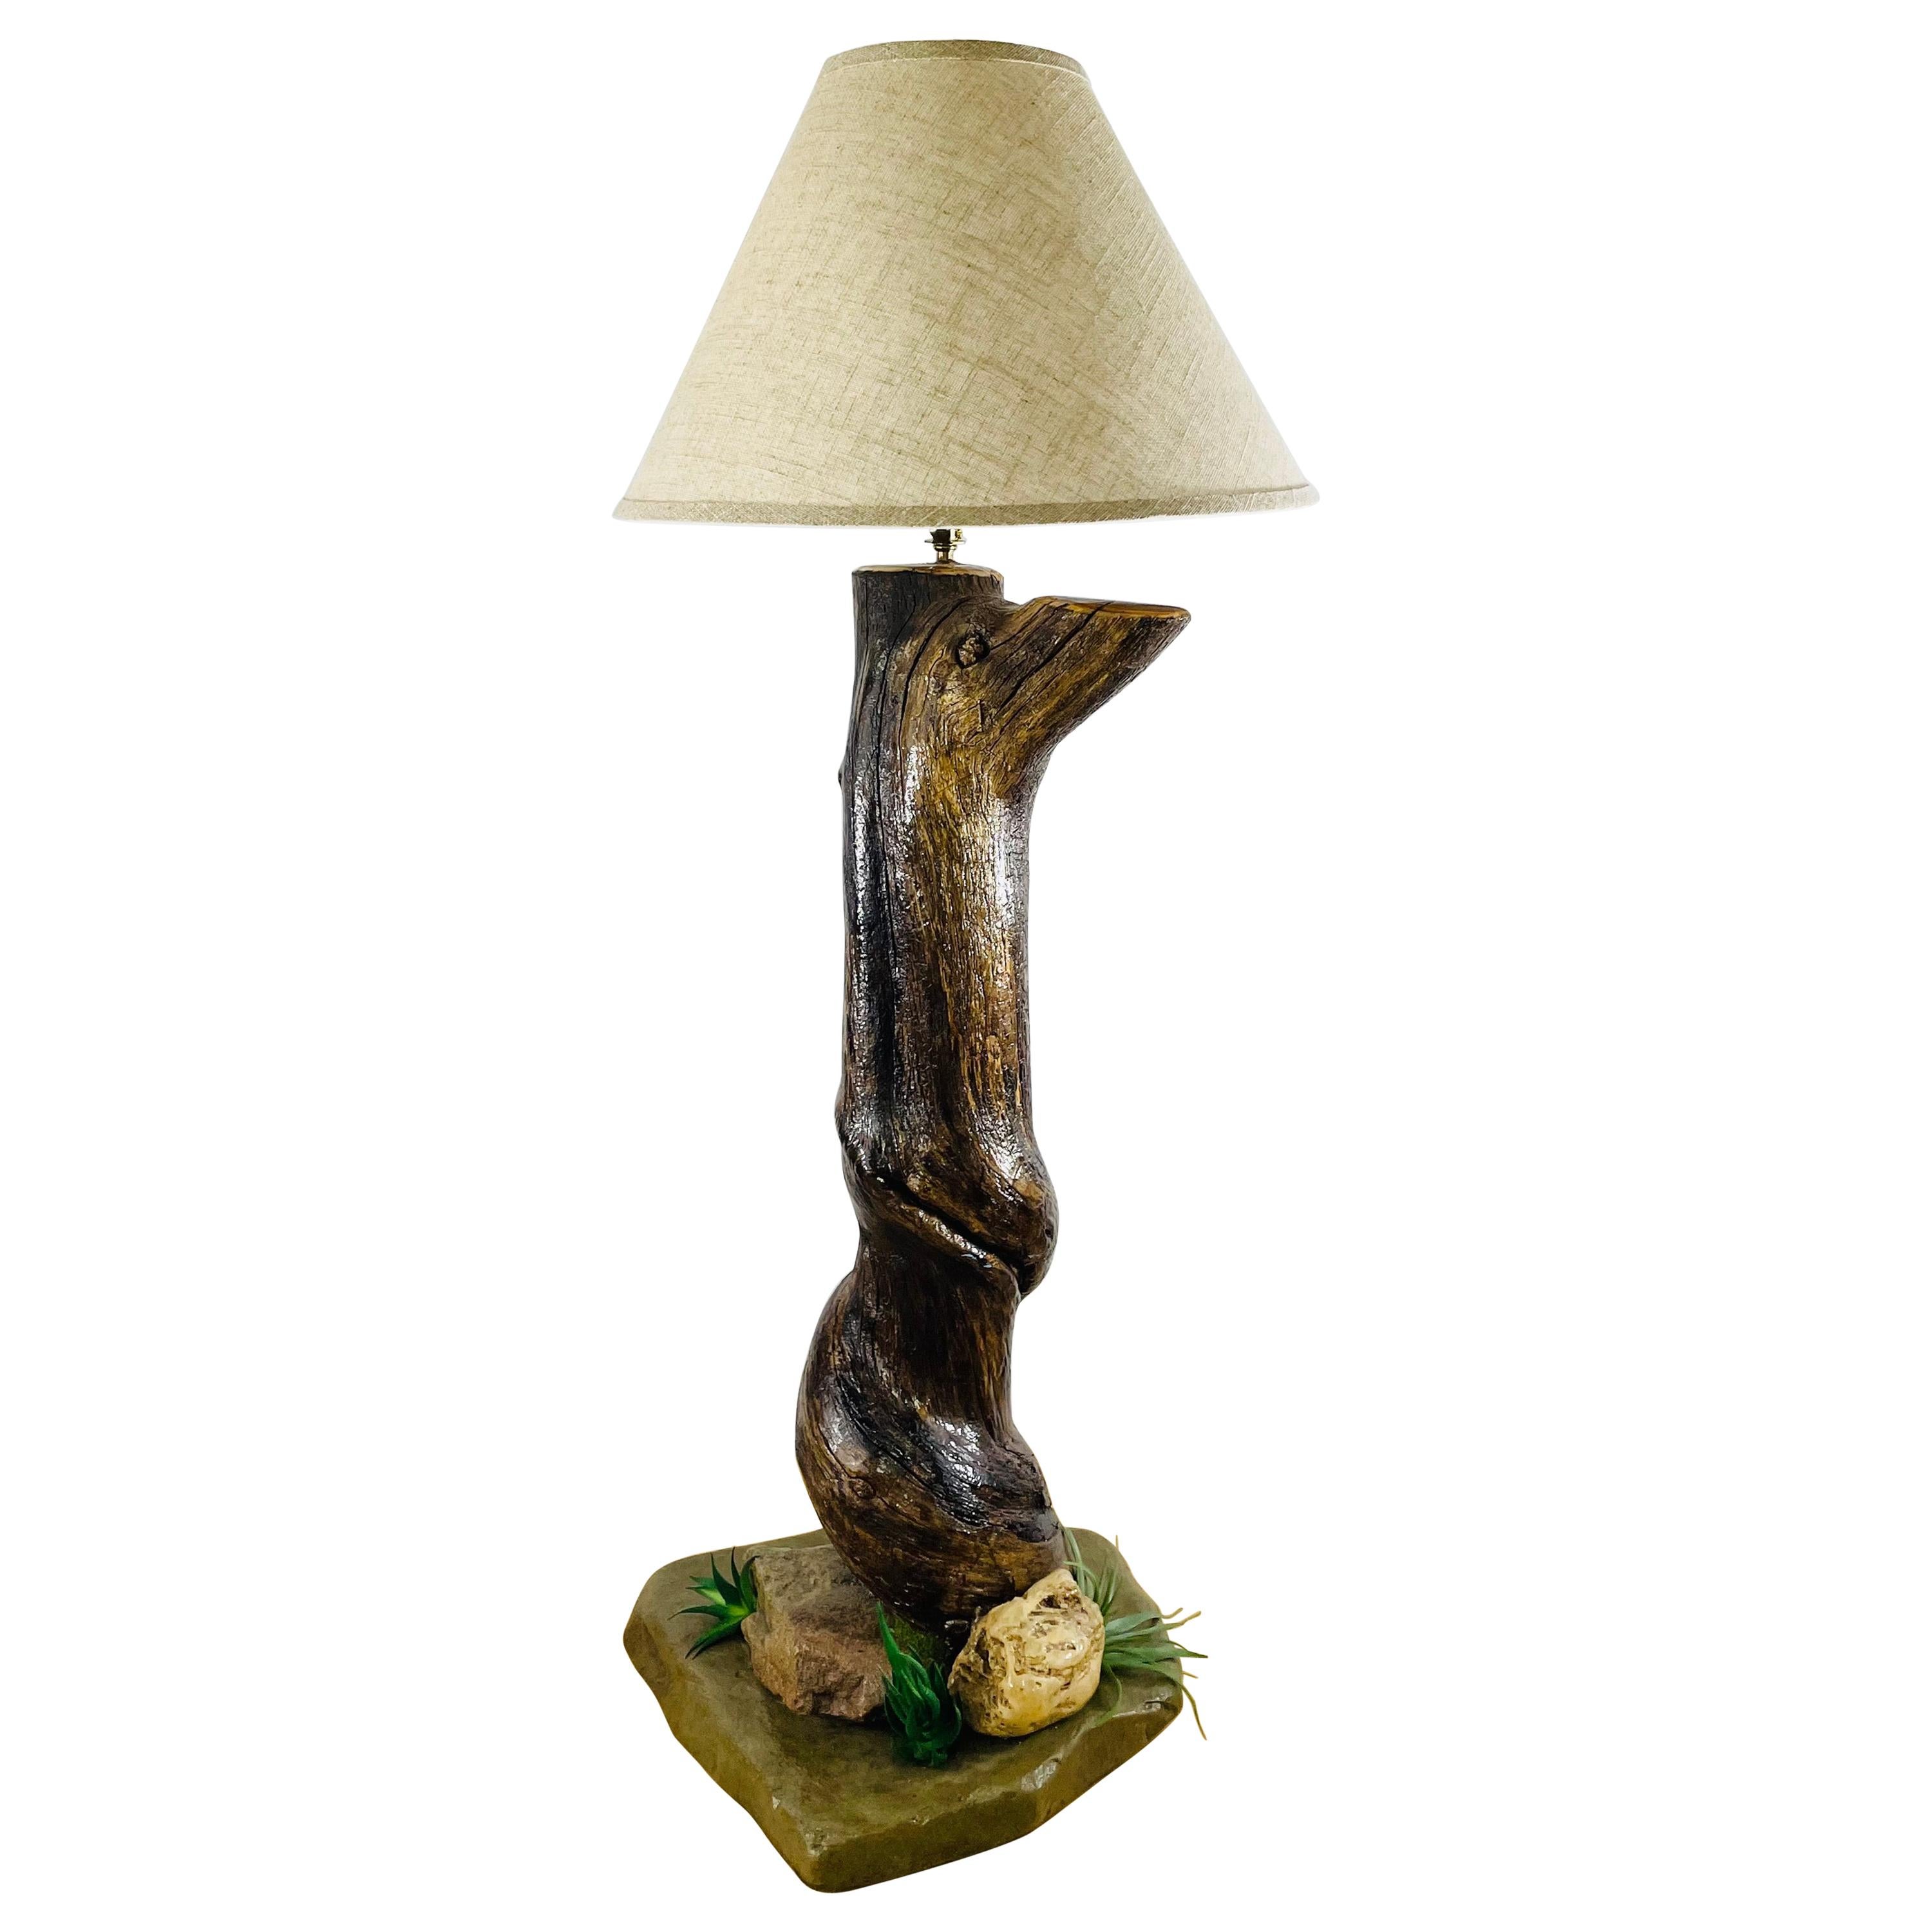 Rustic Tree trunk Shaped Table Lamp in Organic Modern Design Made of Maple Wood For Sale